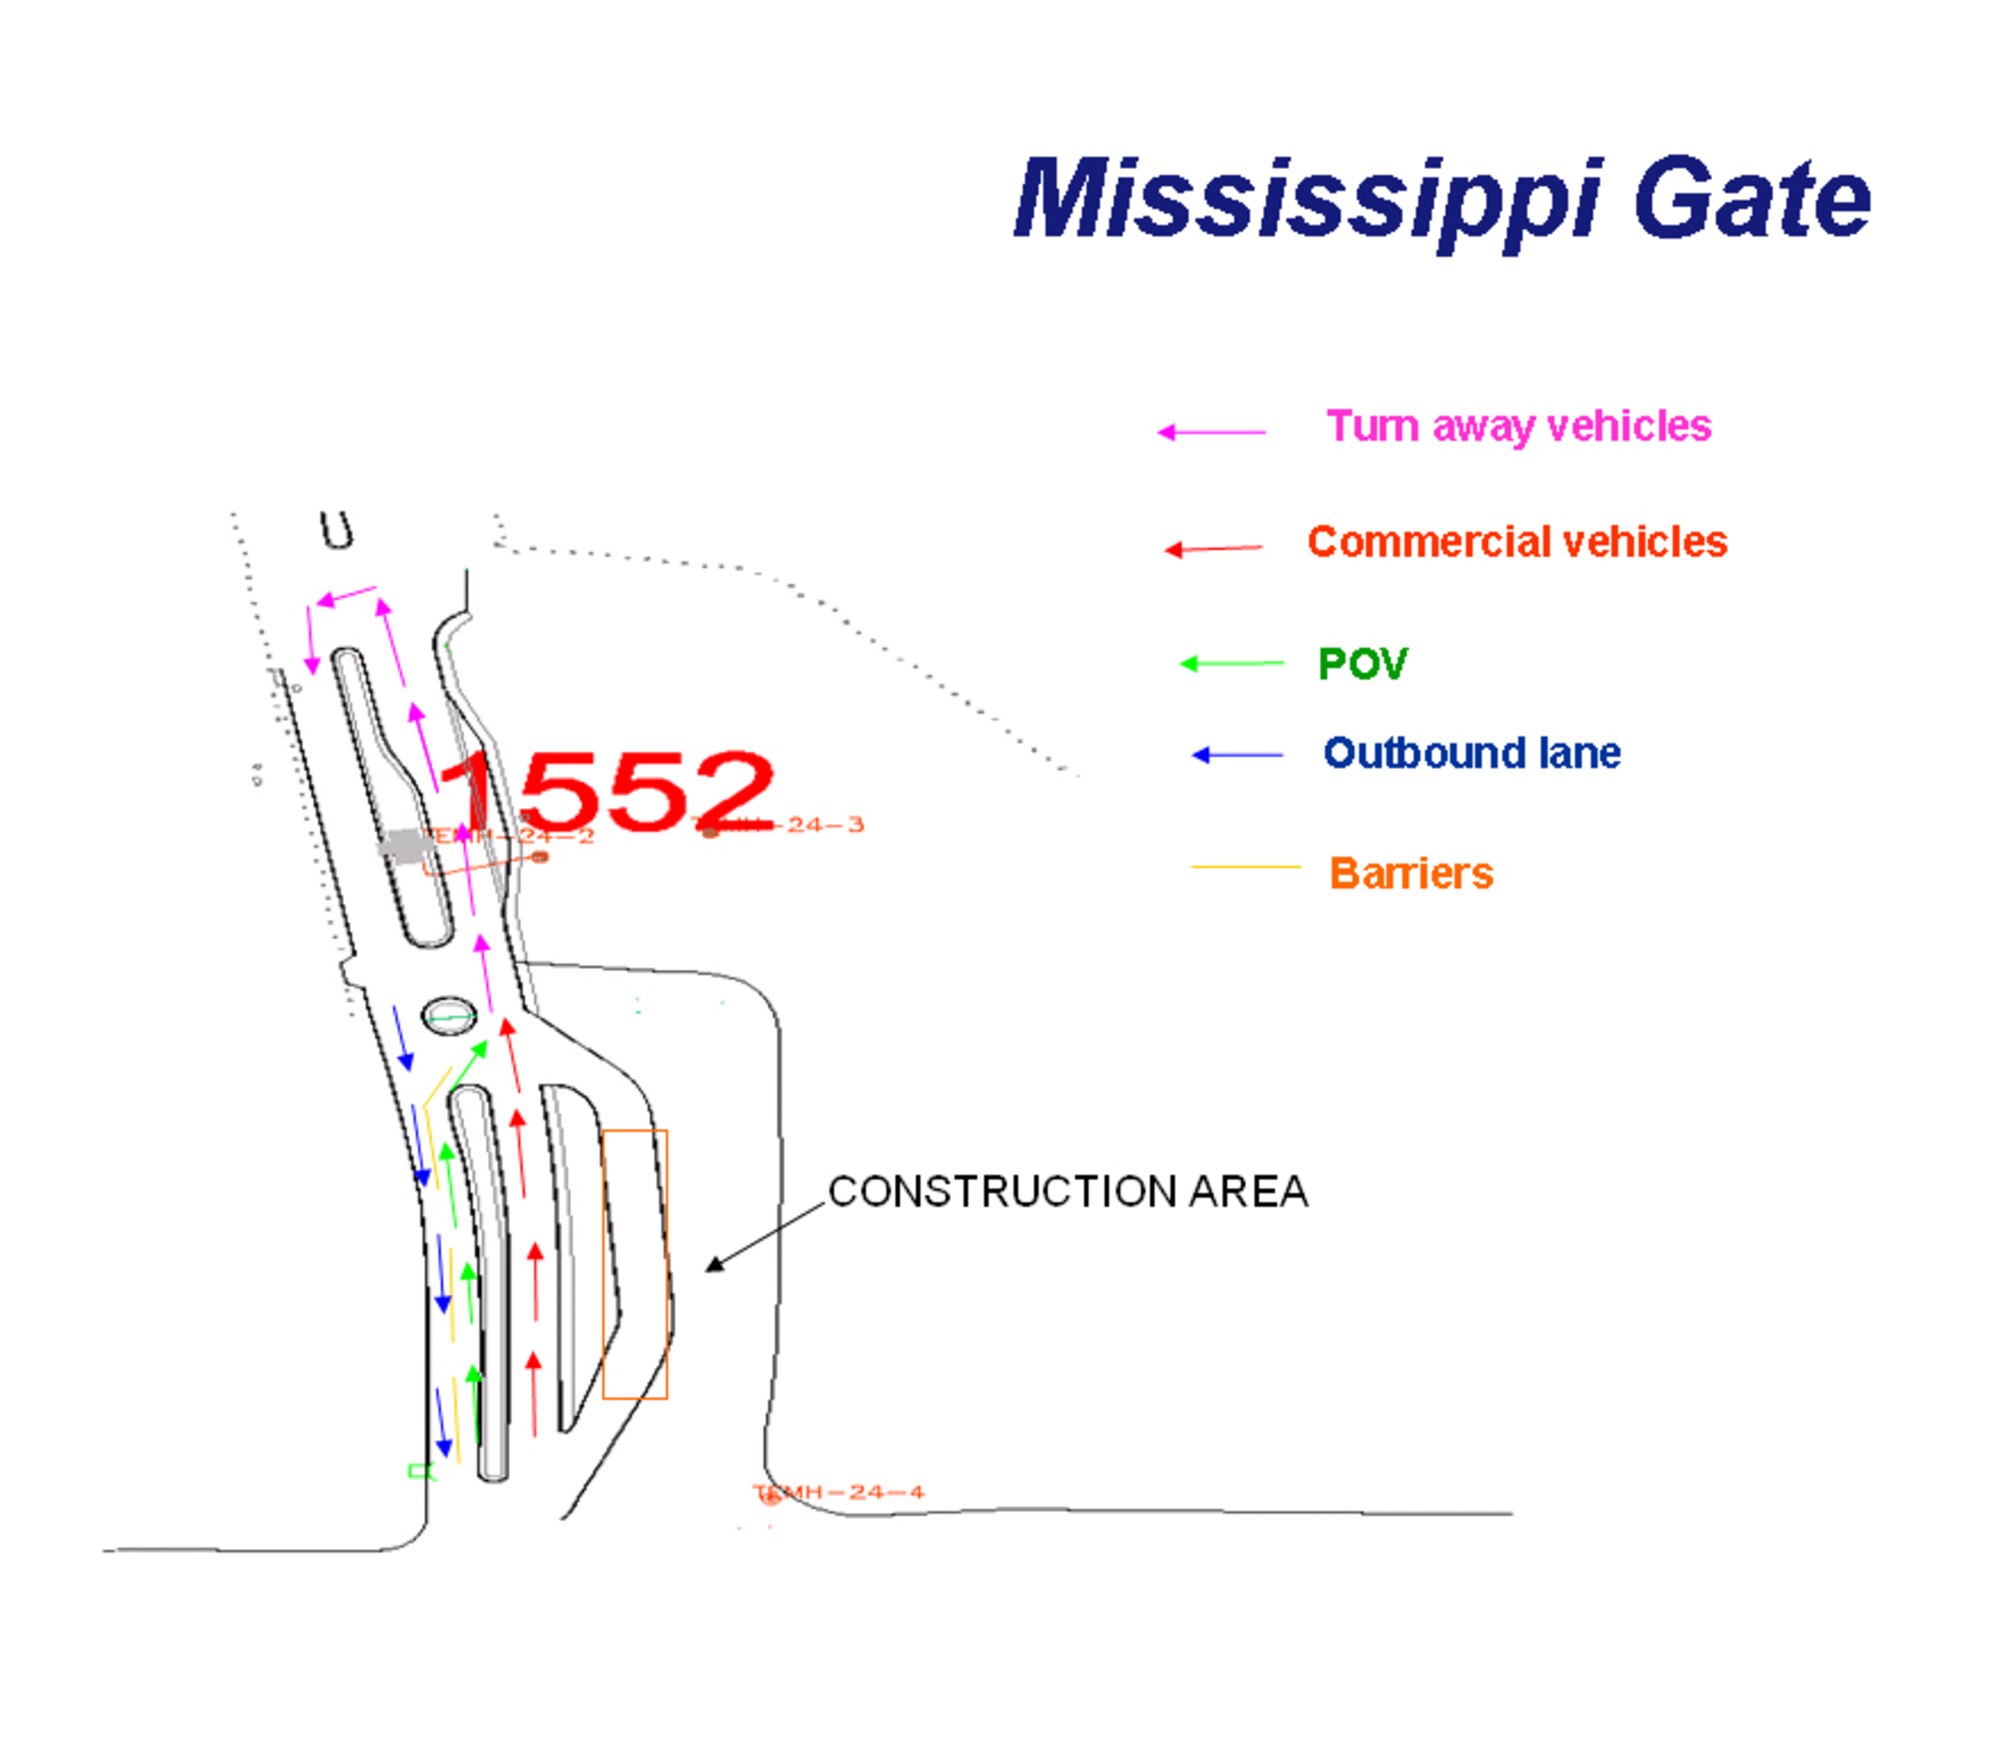 The Mississippi Gate will undergo construction to build a new commercial vehicle inspection shelter from Feb. 18-July 30. The construction will require lane changes when using the gate. Only commercial vehicles will be allowed to use the gate for inbound access to Buckley. One lane will be allowed for outbound use by Buckley workers and residents and the other outbound lane will be converted to an inbound lane for personal vehicles. Barriers will be placed to aid traffic flow. For more information, call Thi Pham at (720) 847-9995.